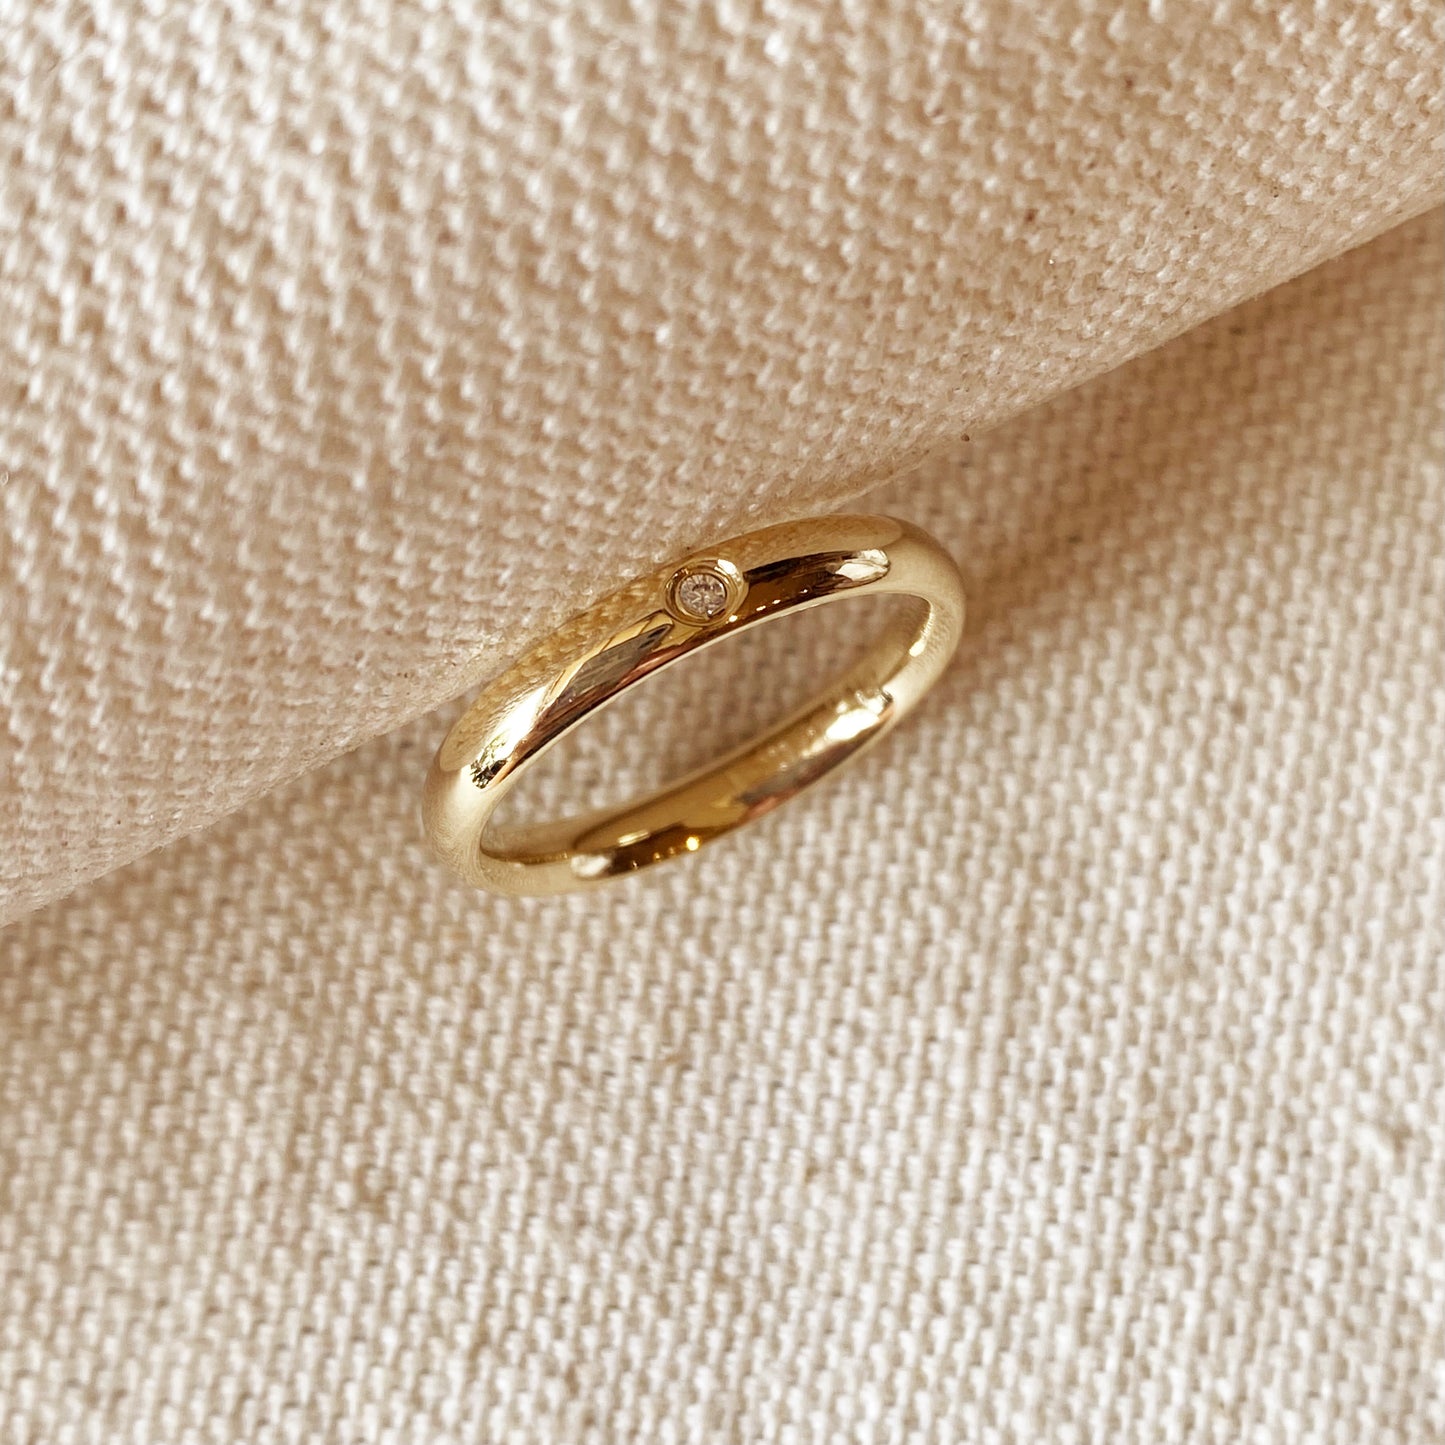 18k Gold Filled Band Ring With Cubic Zirconia Stone